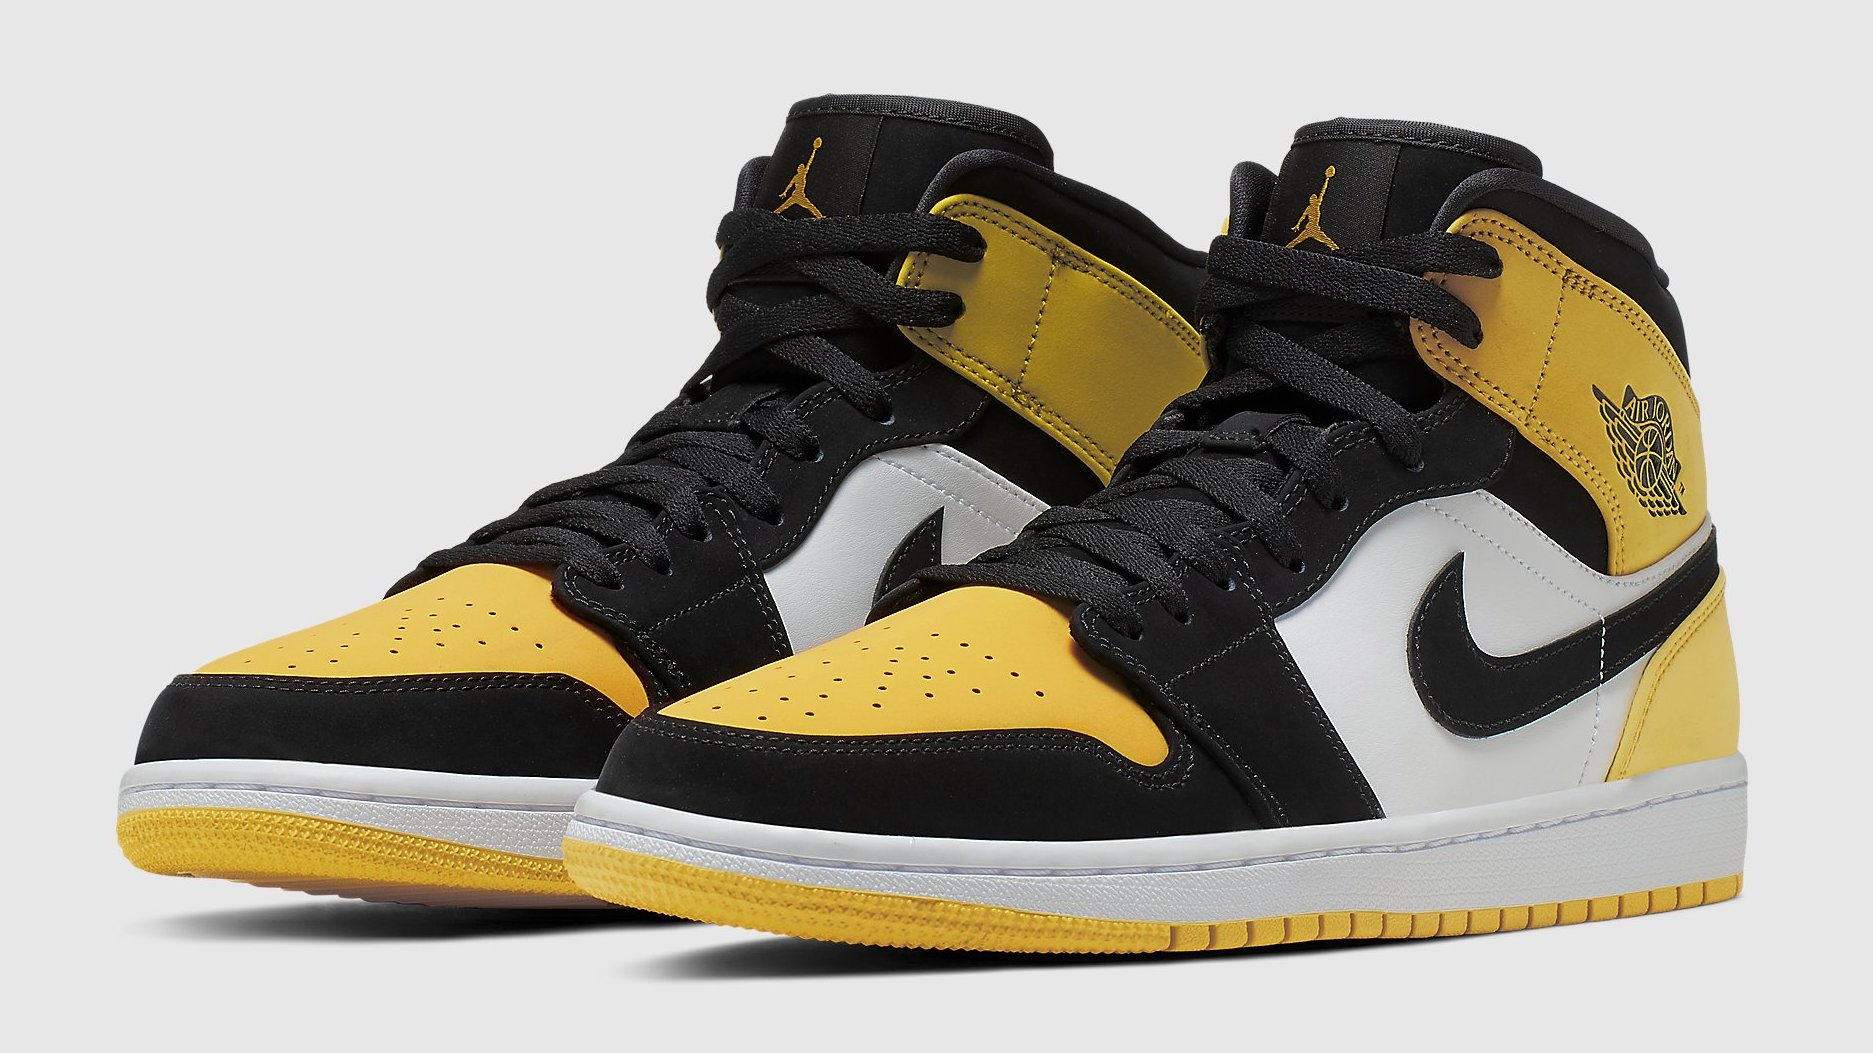 Air Jordan 1 Mid Yellow Toe Release 852542-071 | Sole Collector